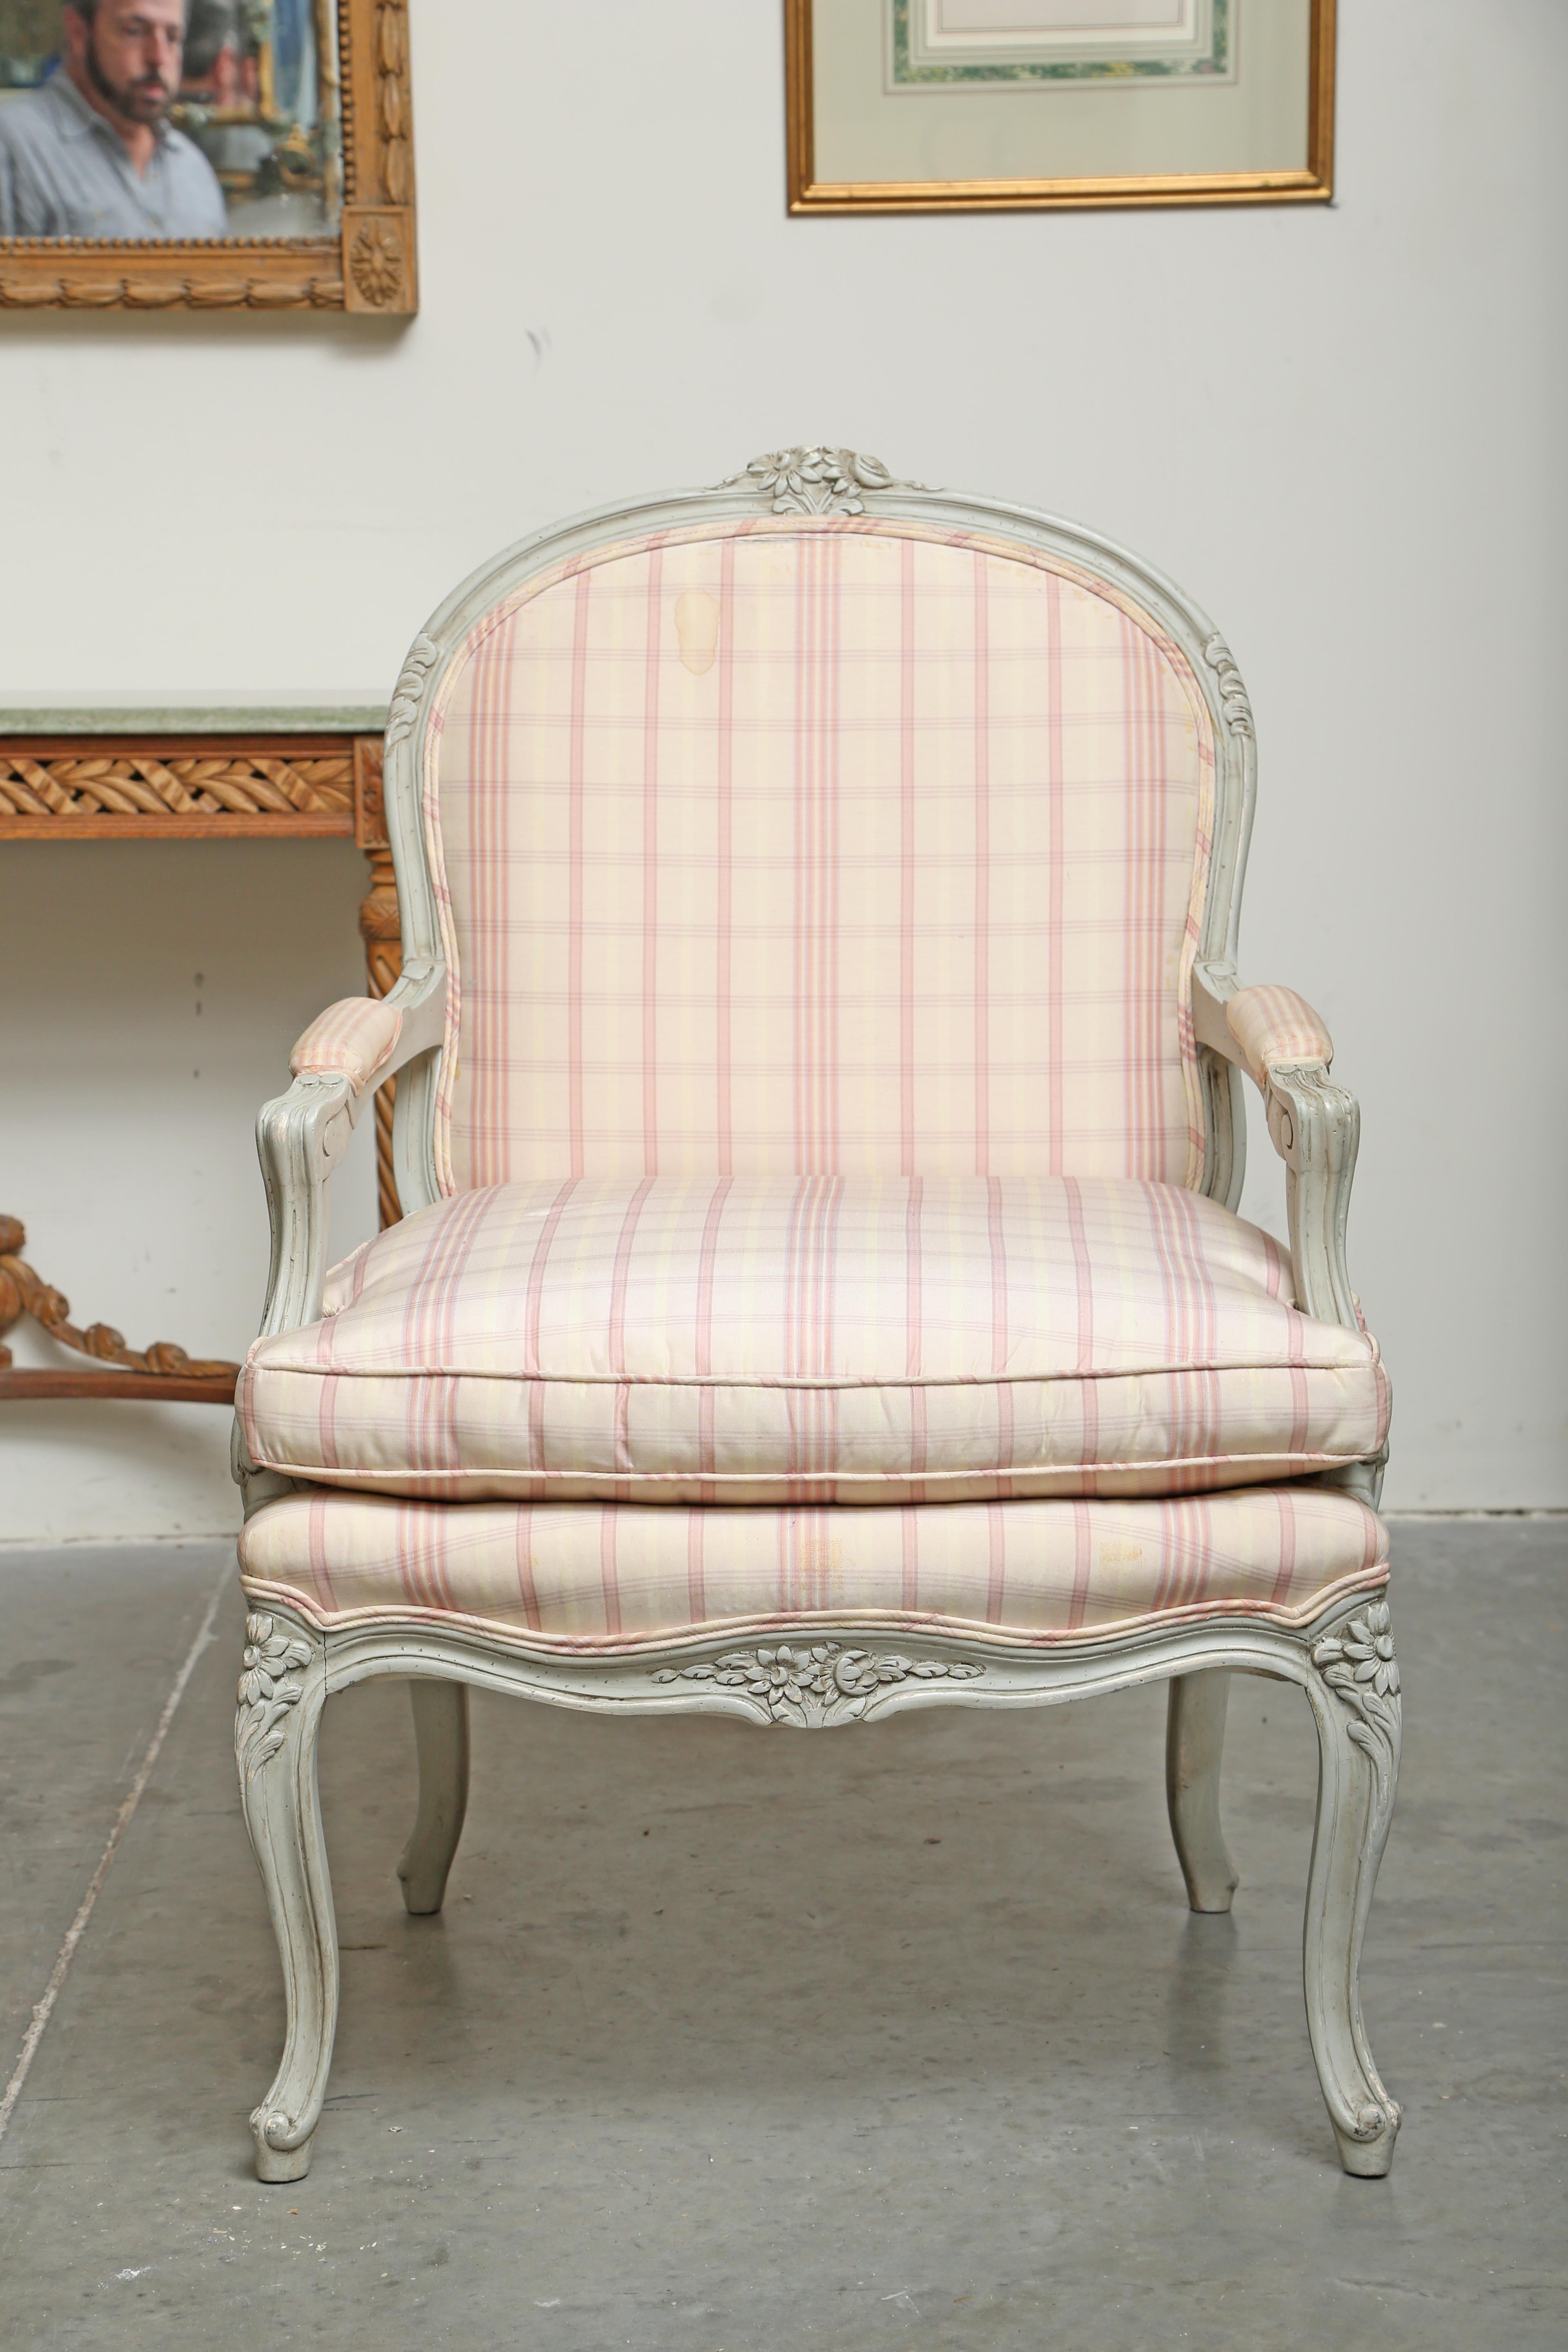 Louis XV style grey painted fauteuil marked Trouvailles on the underside. The crest rail, apron and knees are deeply hand-carved with marguerite daisy flowers. The Trouvailles Furniture Company was located in Watertown, Massachusetts. They were